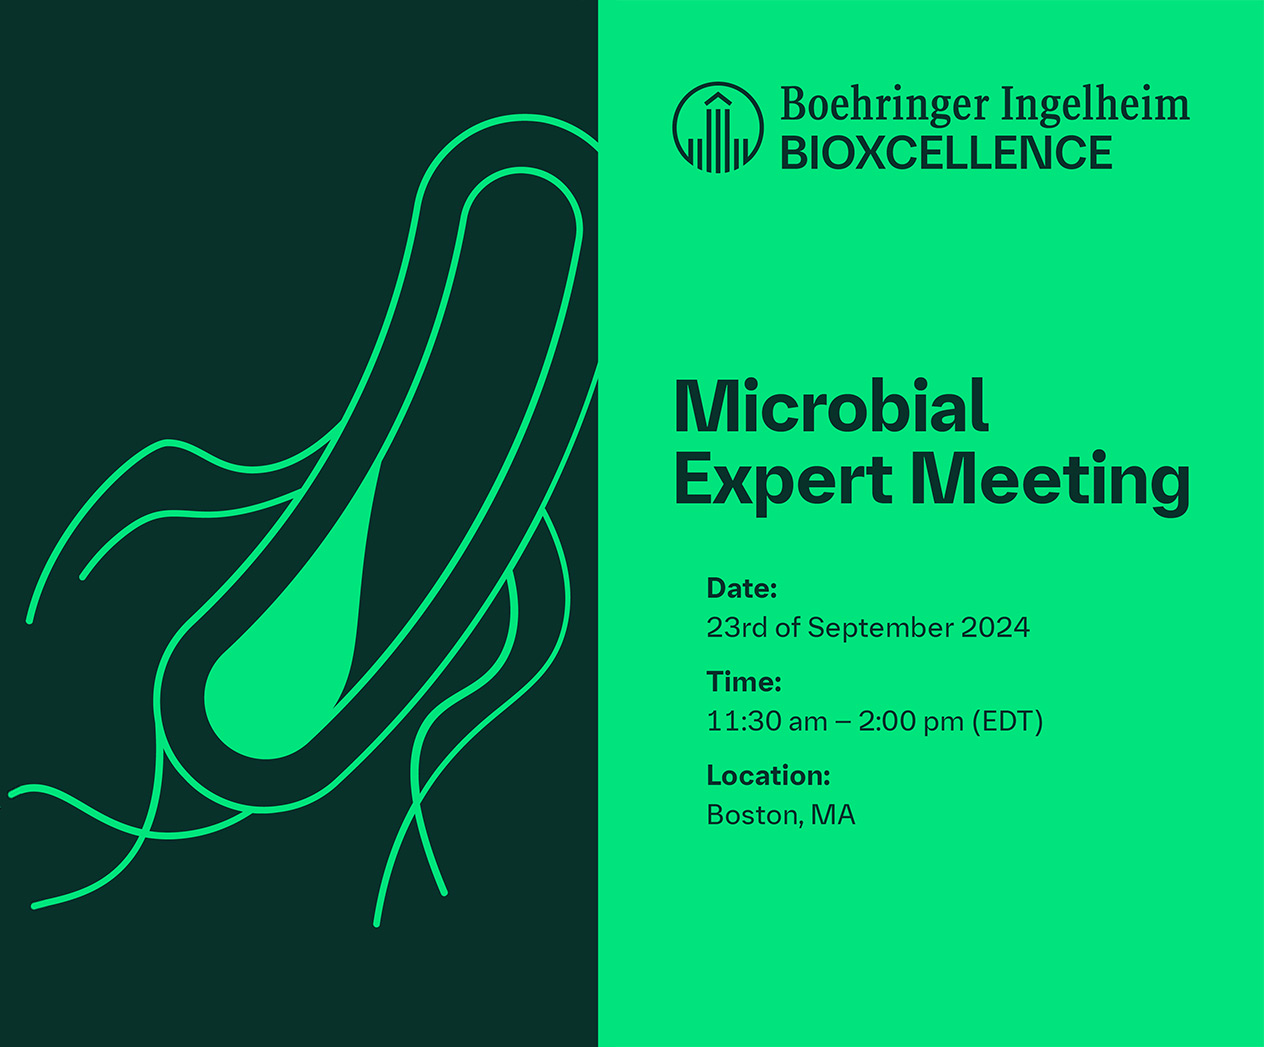 Microbial Expert Meeting